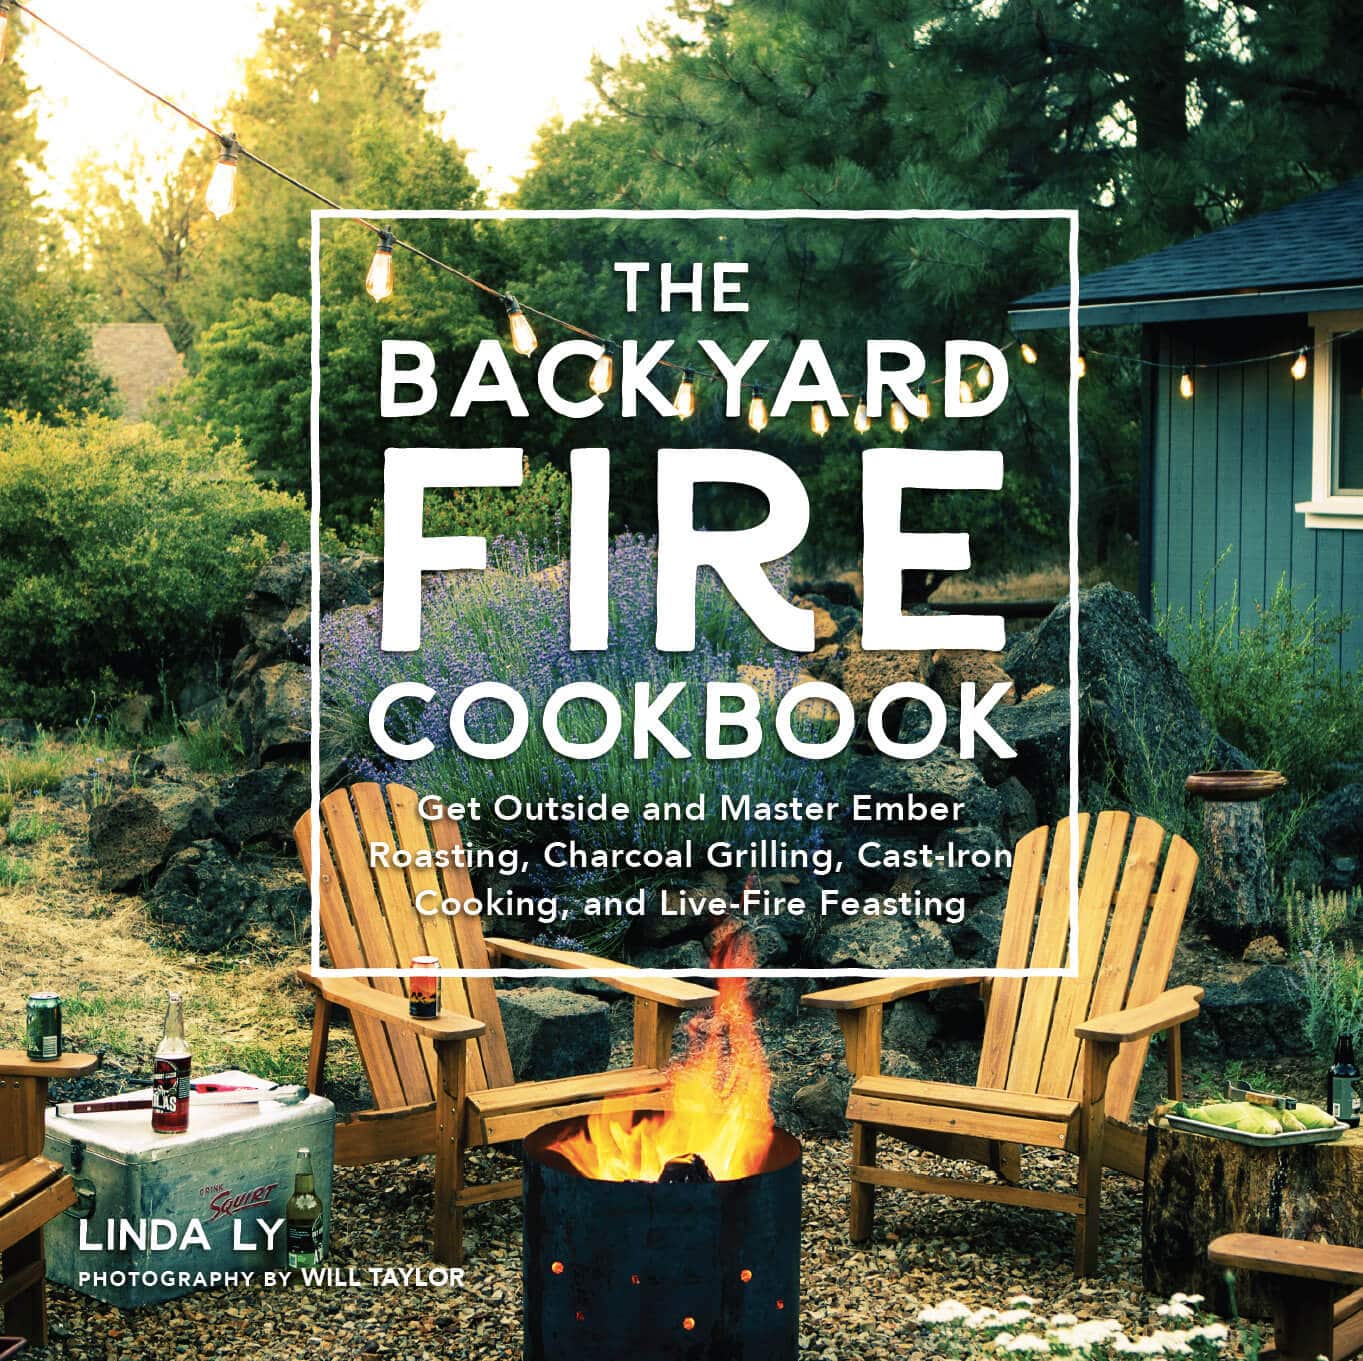 The Backyard Fire Cookbook is now available for preorder